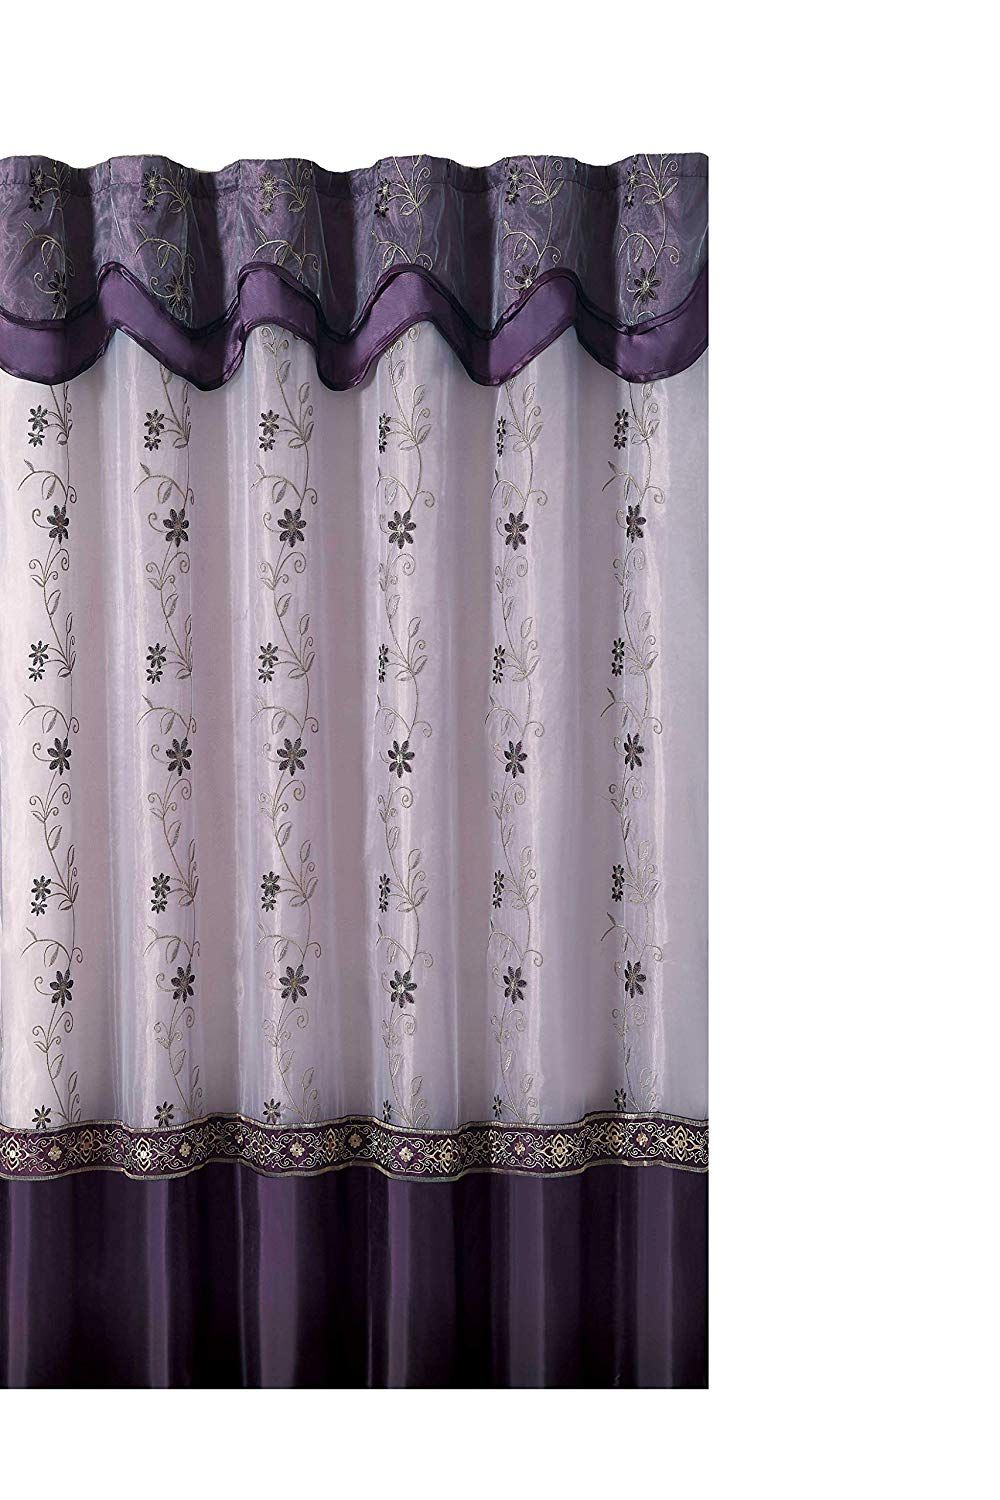 Cheap Sheer Embroidered, Find Sheer Embroidered Deals On With Wavy Leaves Embroidered Sheer Extra Wide Grommet Curtain Panels (Photo 27 of 30)